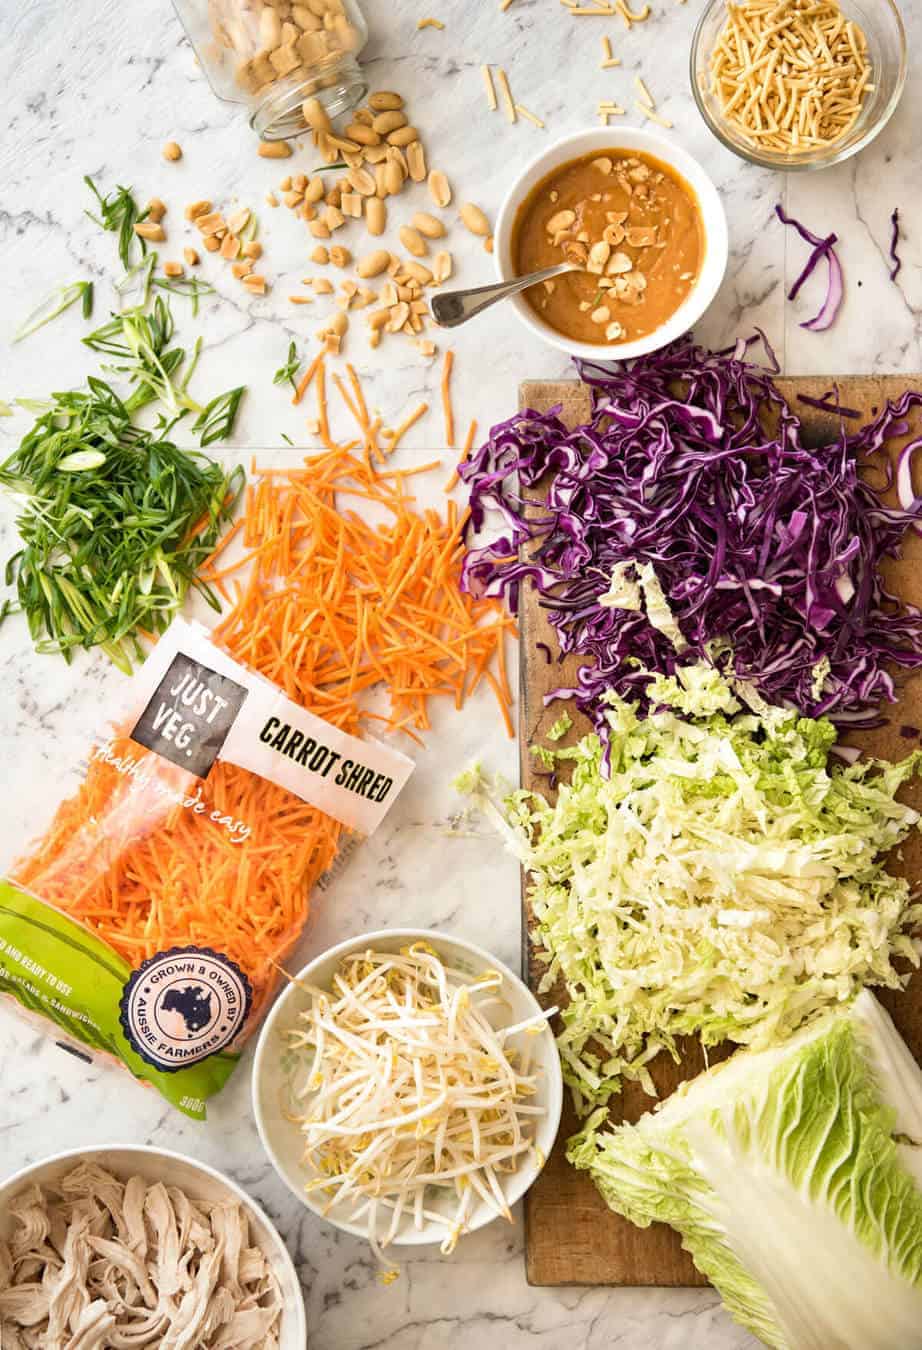 Chinese Chicken Salad with Asian Peanut Salad Dressing - made with cabbage, shredded chicken, crunchy noodles, carrot and a killer peanut dressing! www.recipetineats.com